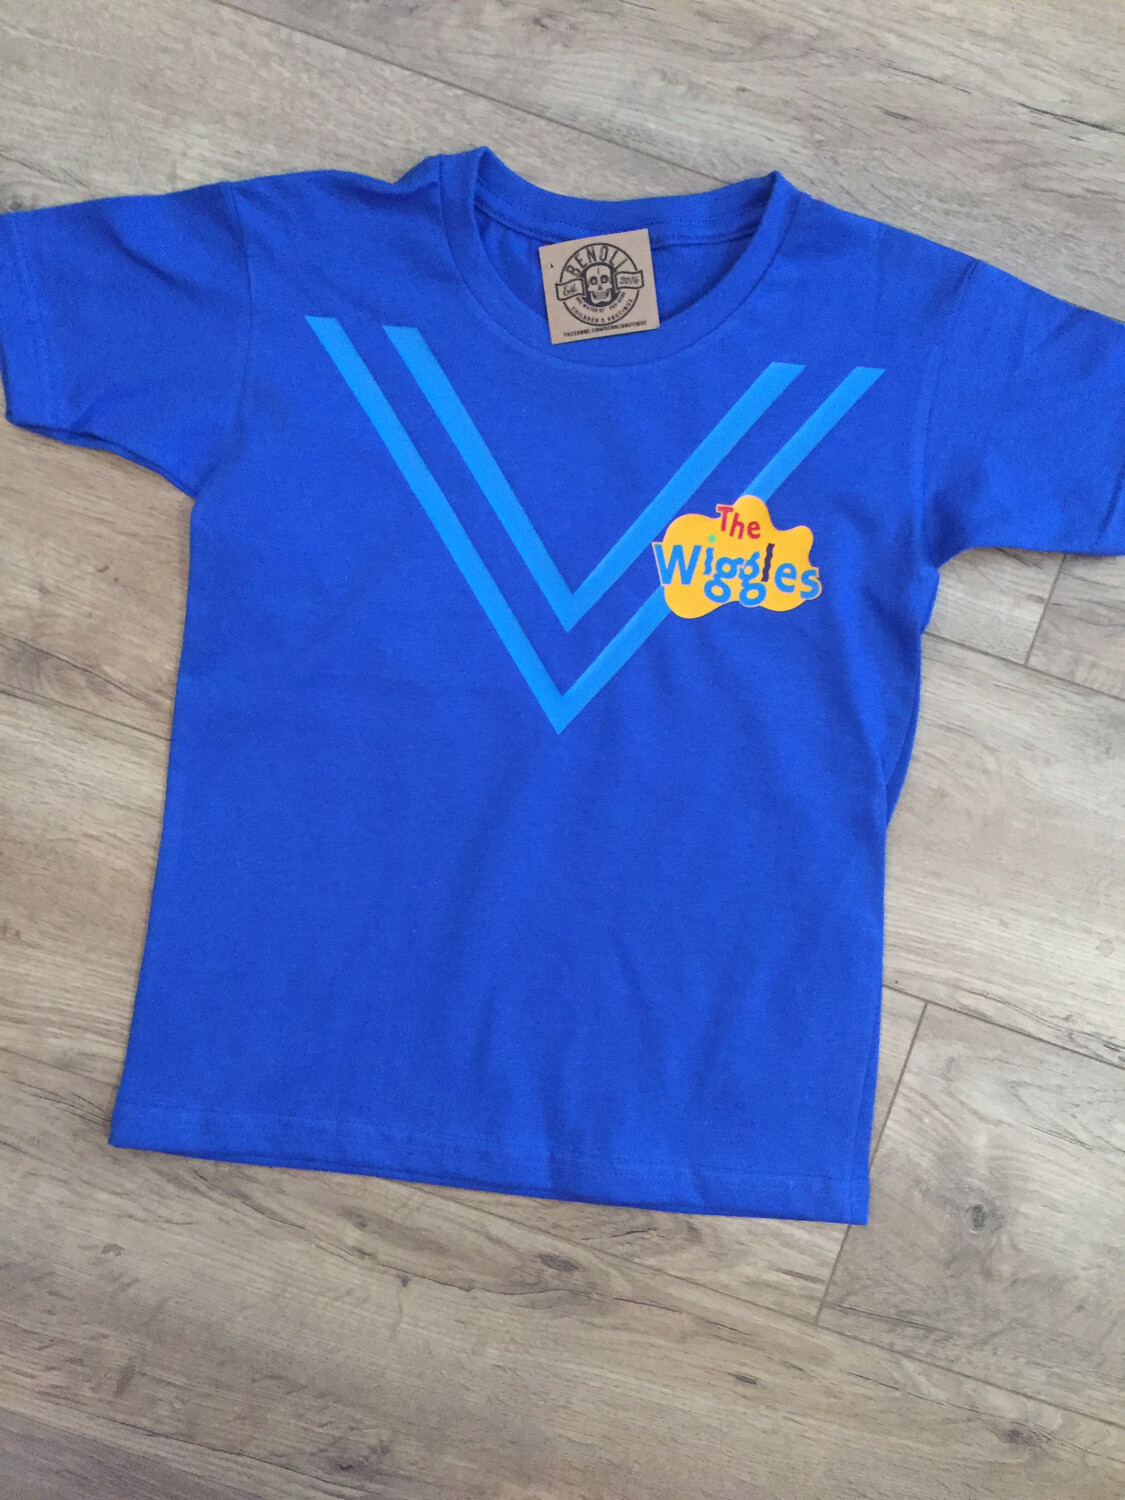 The Wiggles On-Screen shirt